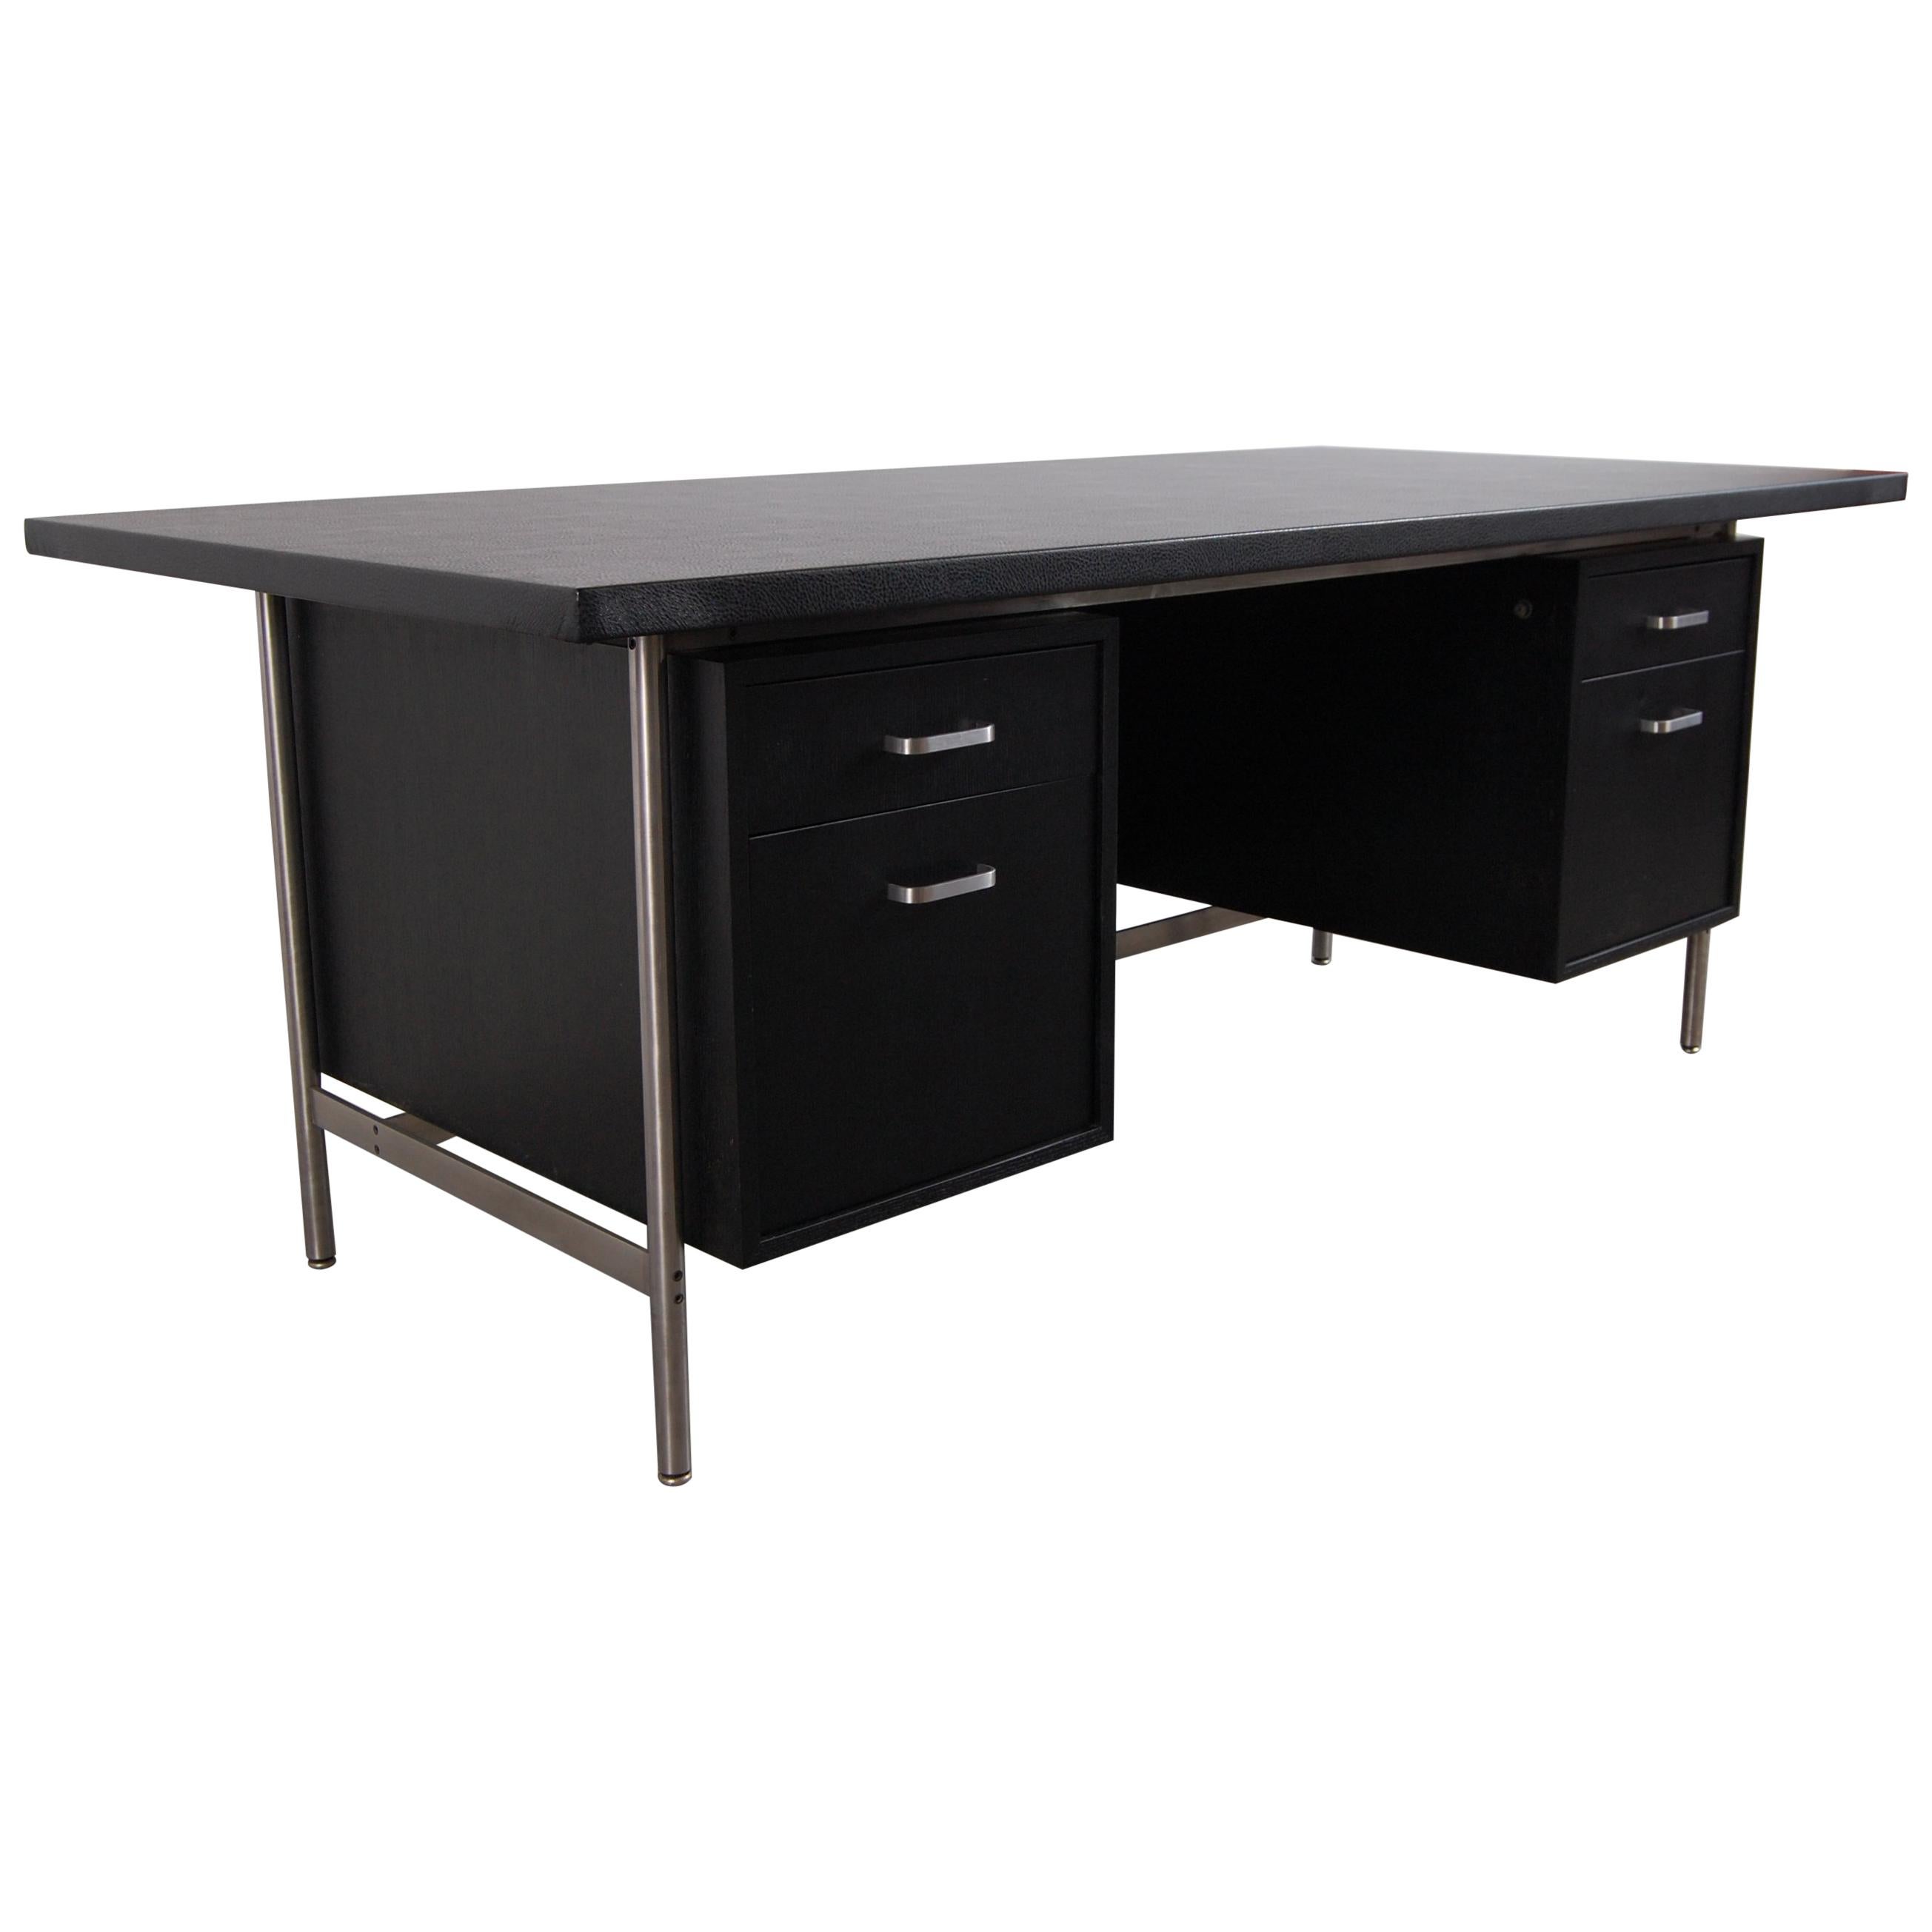 Desk in ebonized oak and stainless steel, circa 1959. This desk came out of the Mies van der Rohe designed Seagram Building, at 375 Park Avenue, in New York City. Although the designer of the desk is unclear, the furnishings for building, including